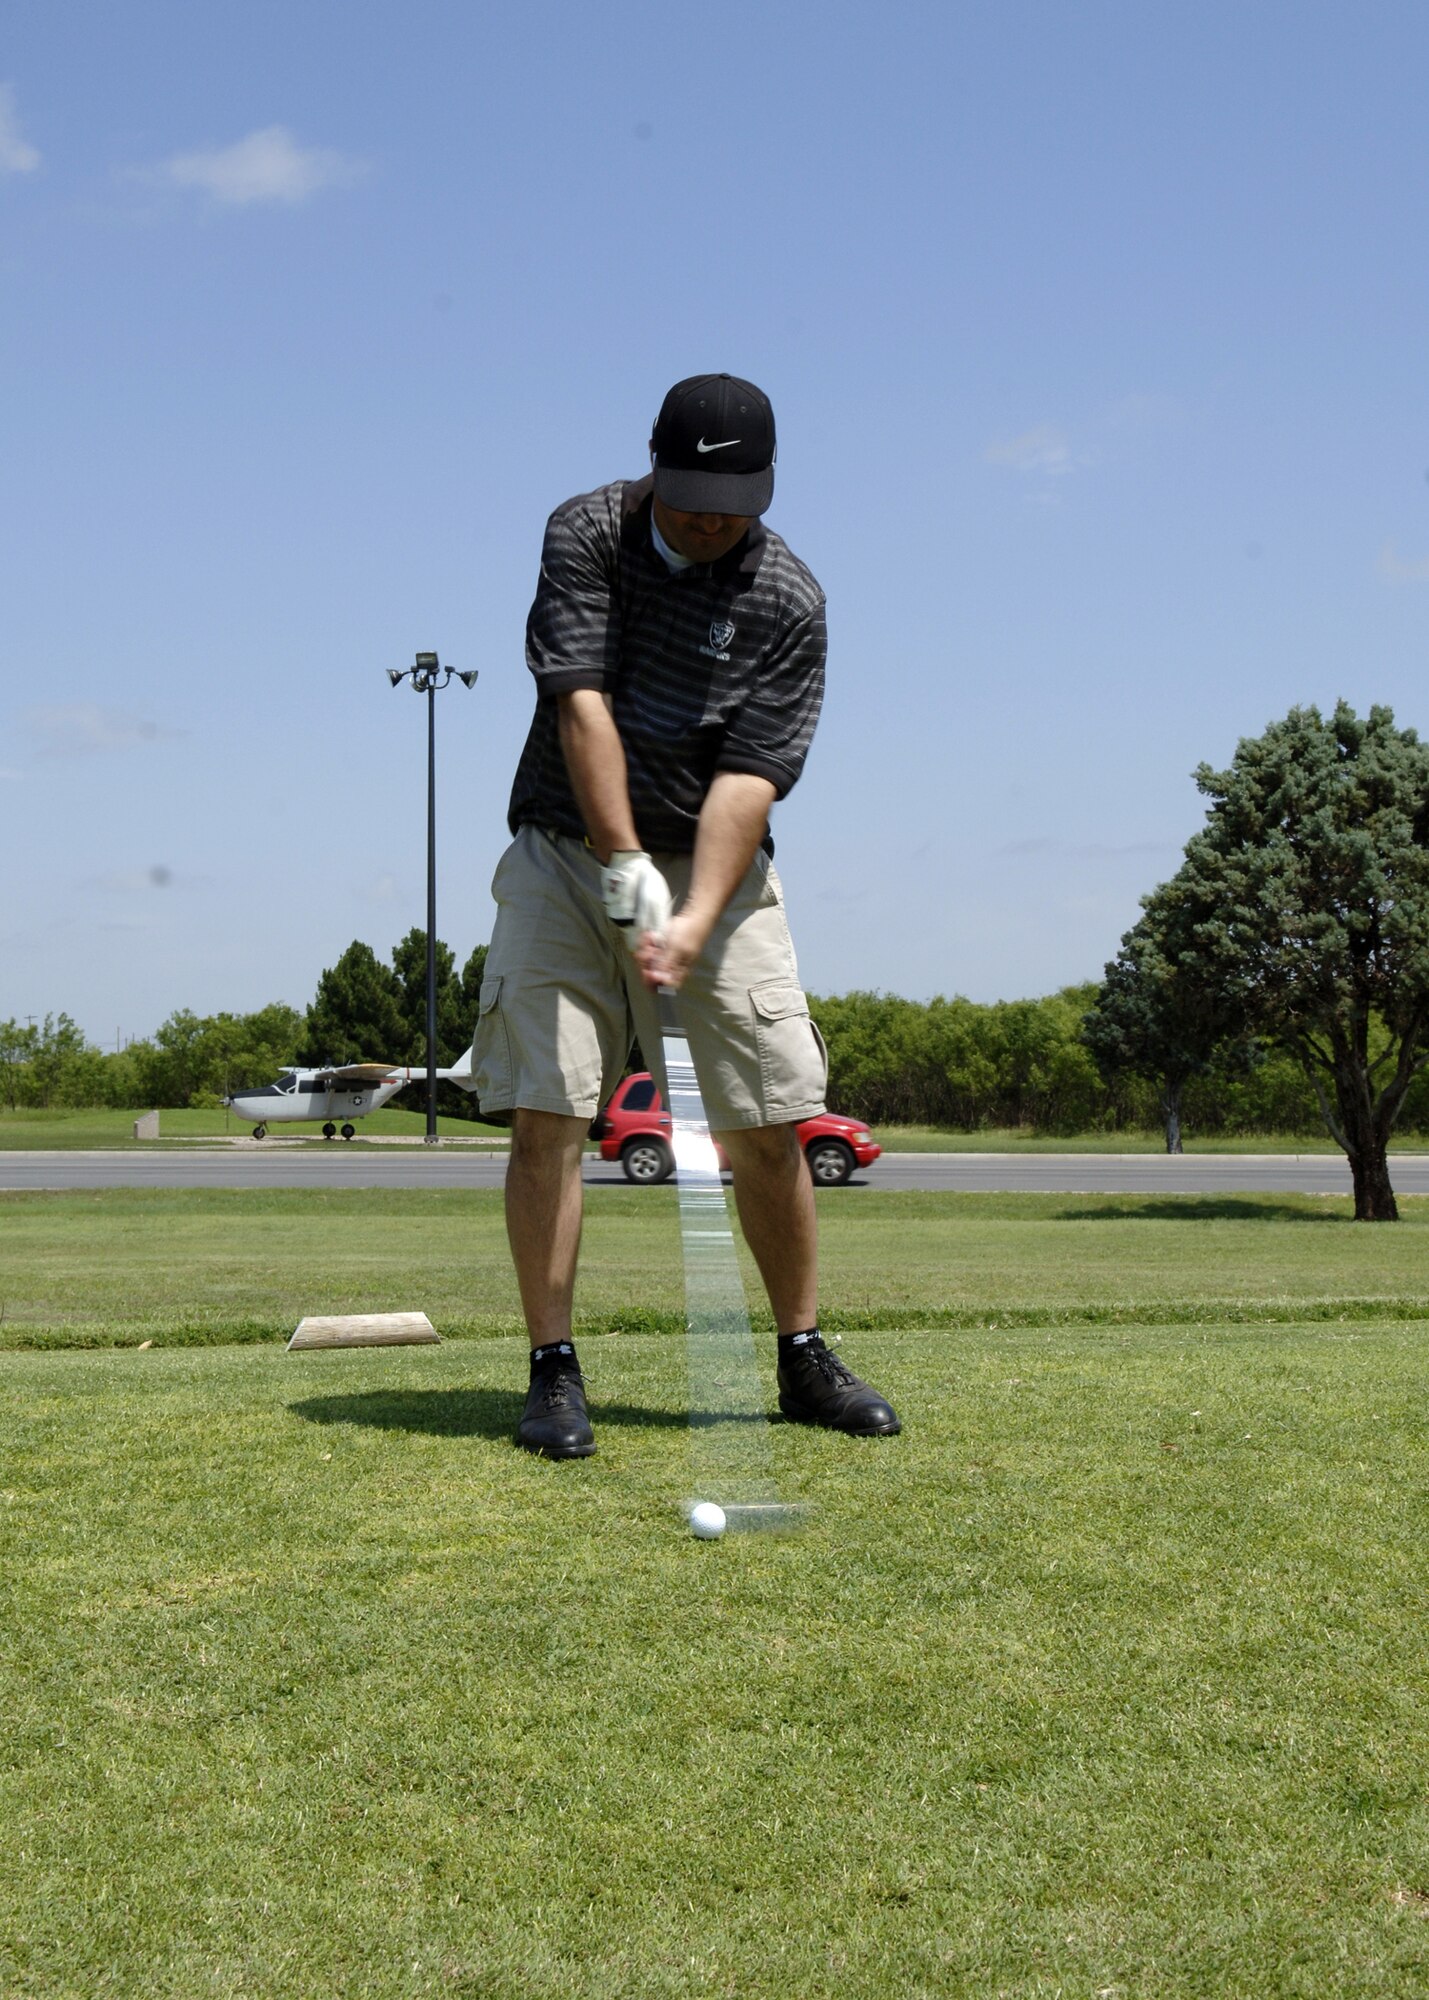 DYESS AIR FORCE BASE, Texas -- Master Sgt. AJ Oldfather, 7th Civil Engineer Squadron, drives on the 17th hole during a 9th Bomb Squadron golf tournament June 1. 132 Dyess people played, and the tournament raised $2,000 for the Big Brother and Big Sisters Organization in Abilene. (U.S. Air Force photo/Airman Stephen Reyes